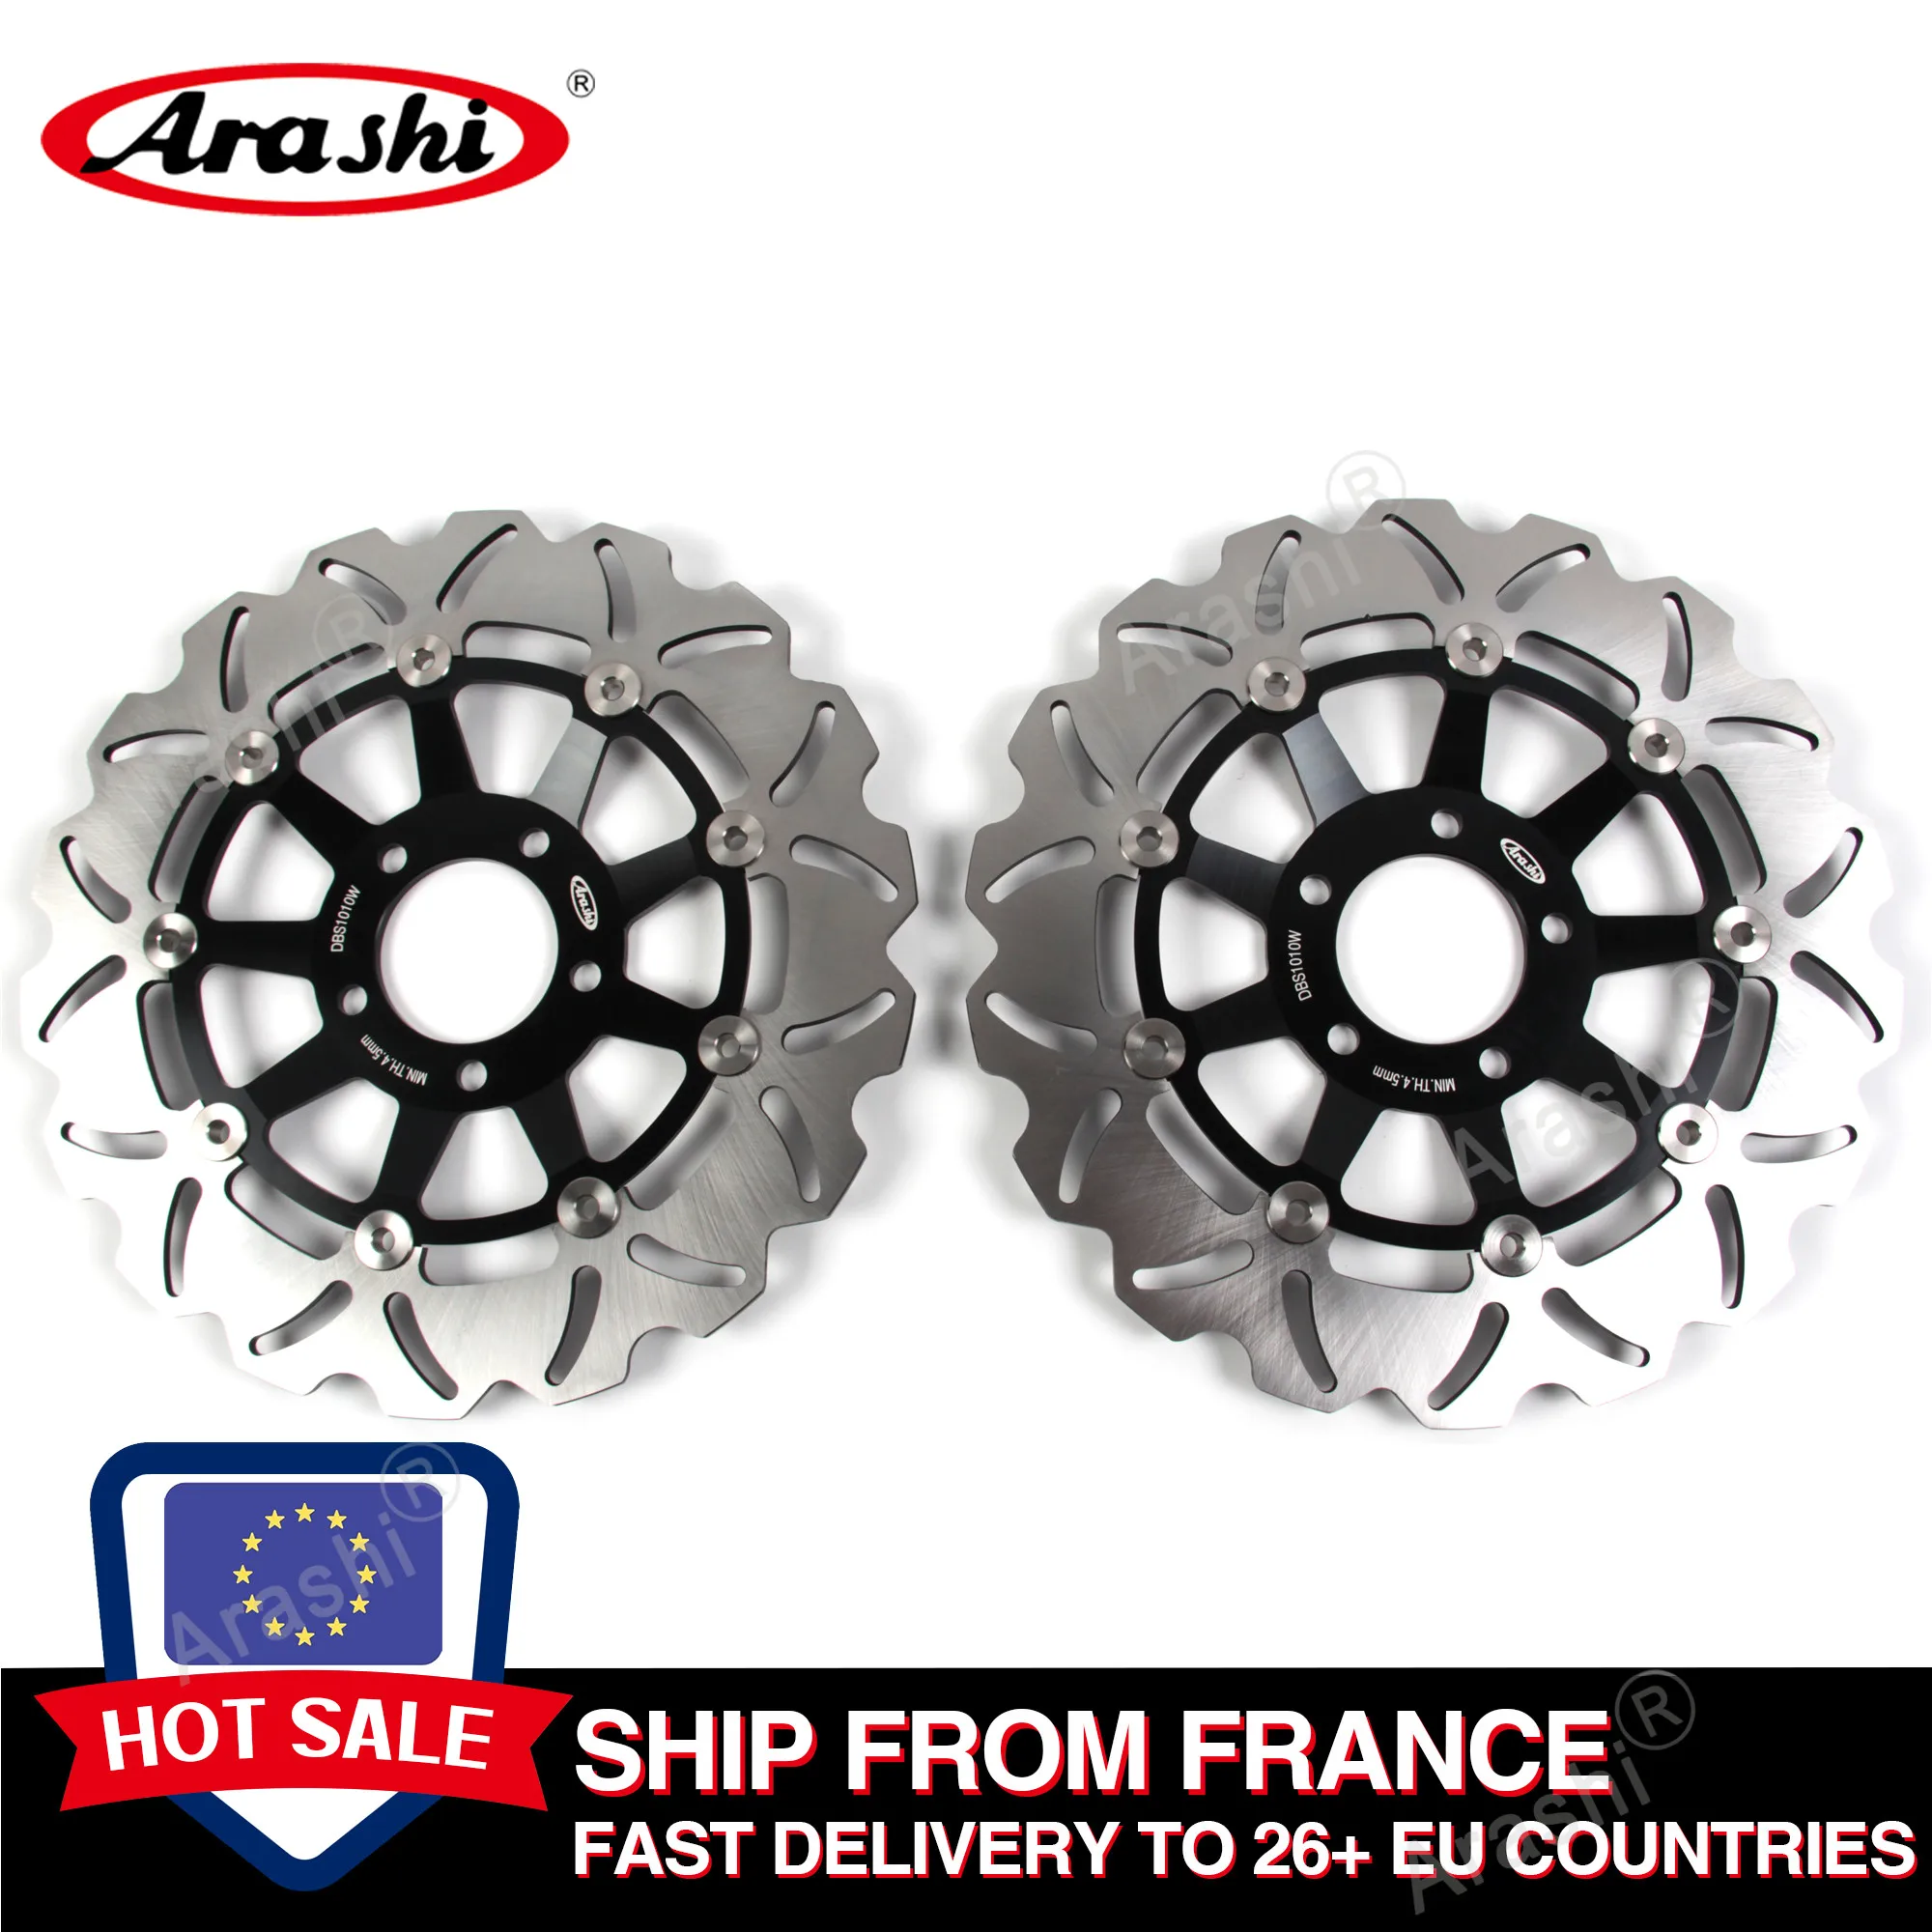 US $165.99 Ship from France For SUZUKI GSF BANDIT 1200 19962005 GSF1200 CNC Front Brake Disc Rotors GSX INAZUMA GSX1200 19992003 RF 900